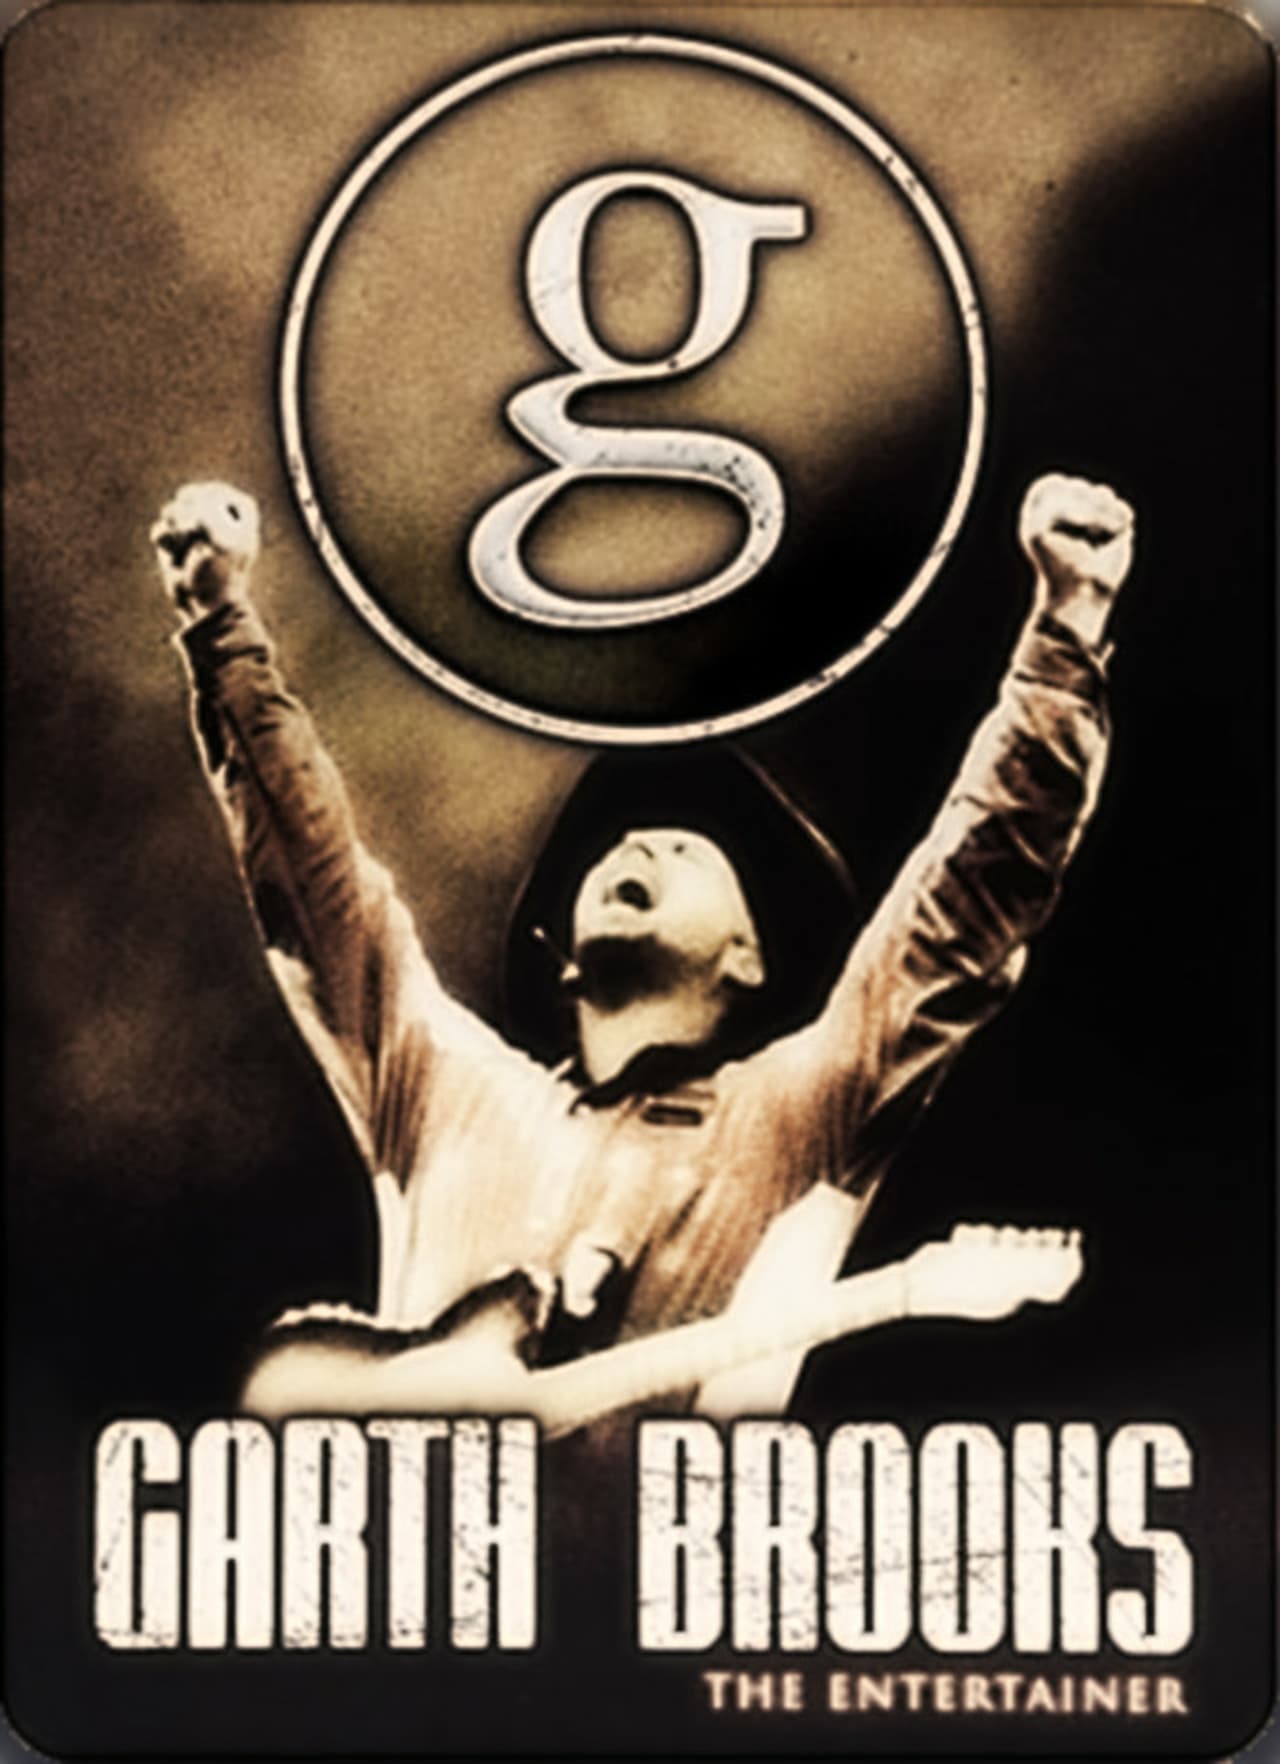 This Is Garth Brooks, Too!